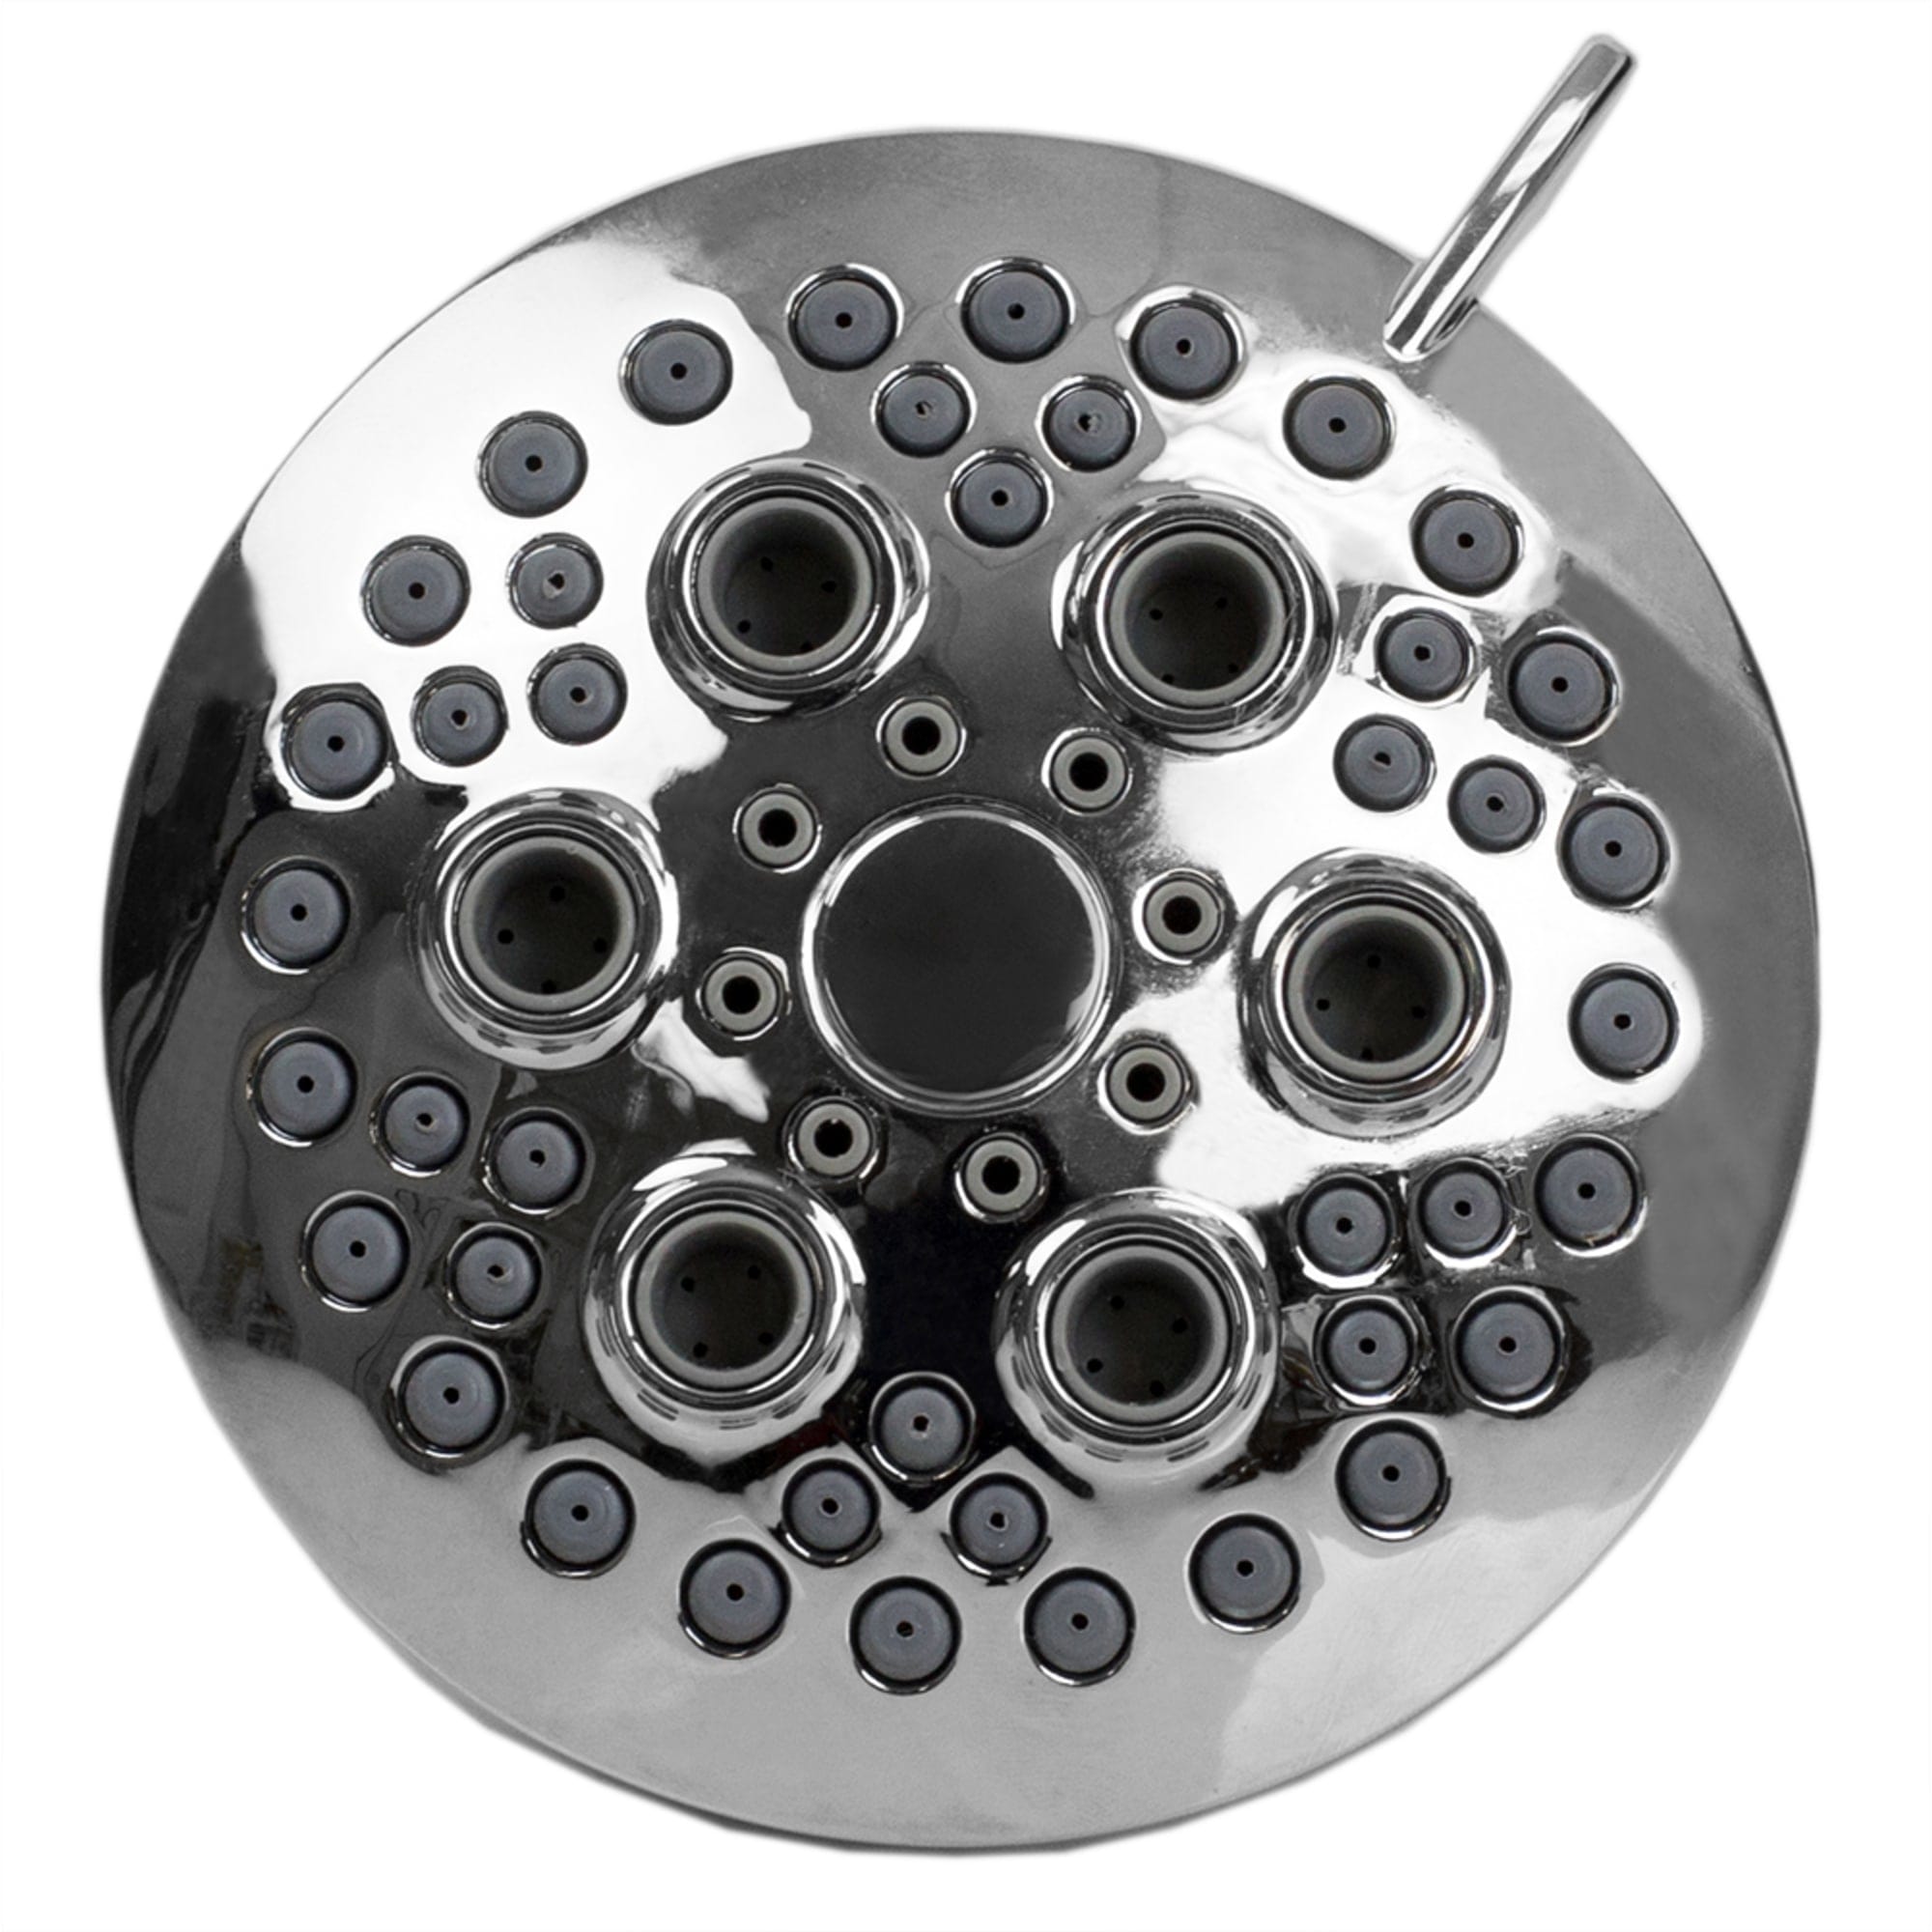 Home Basics Indulge 5 Function Fixed Shower Head, Chrome $6.00 EACH, CASE PACK OF 12